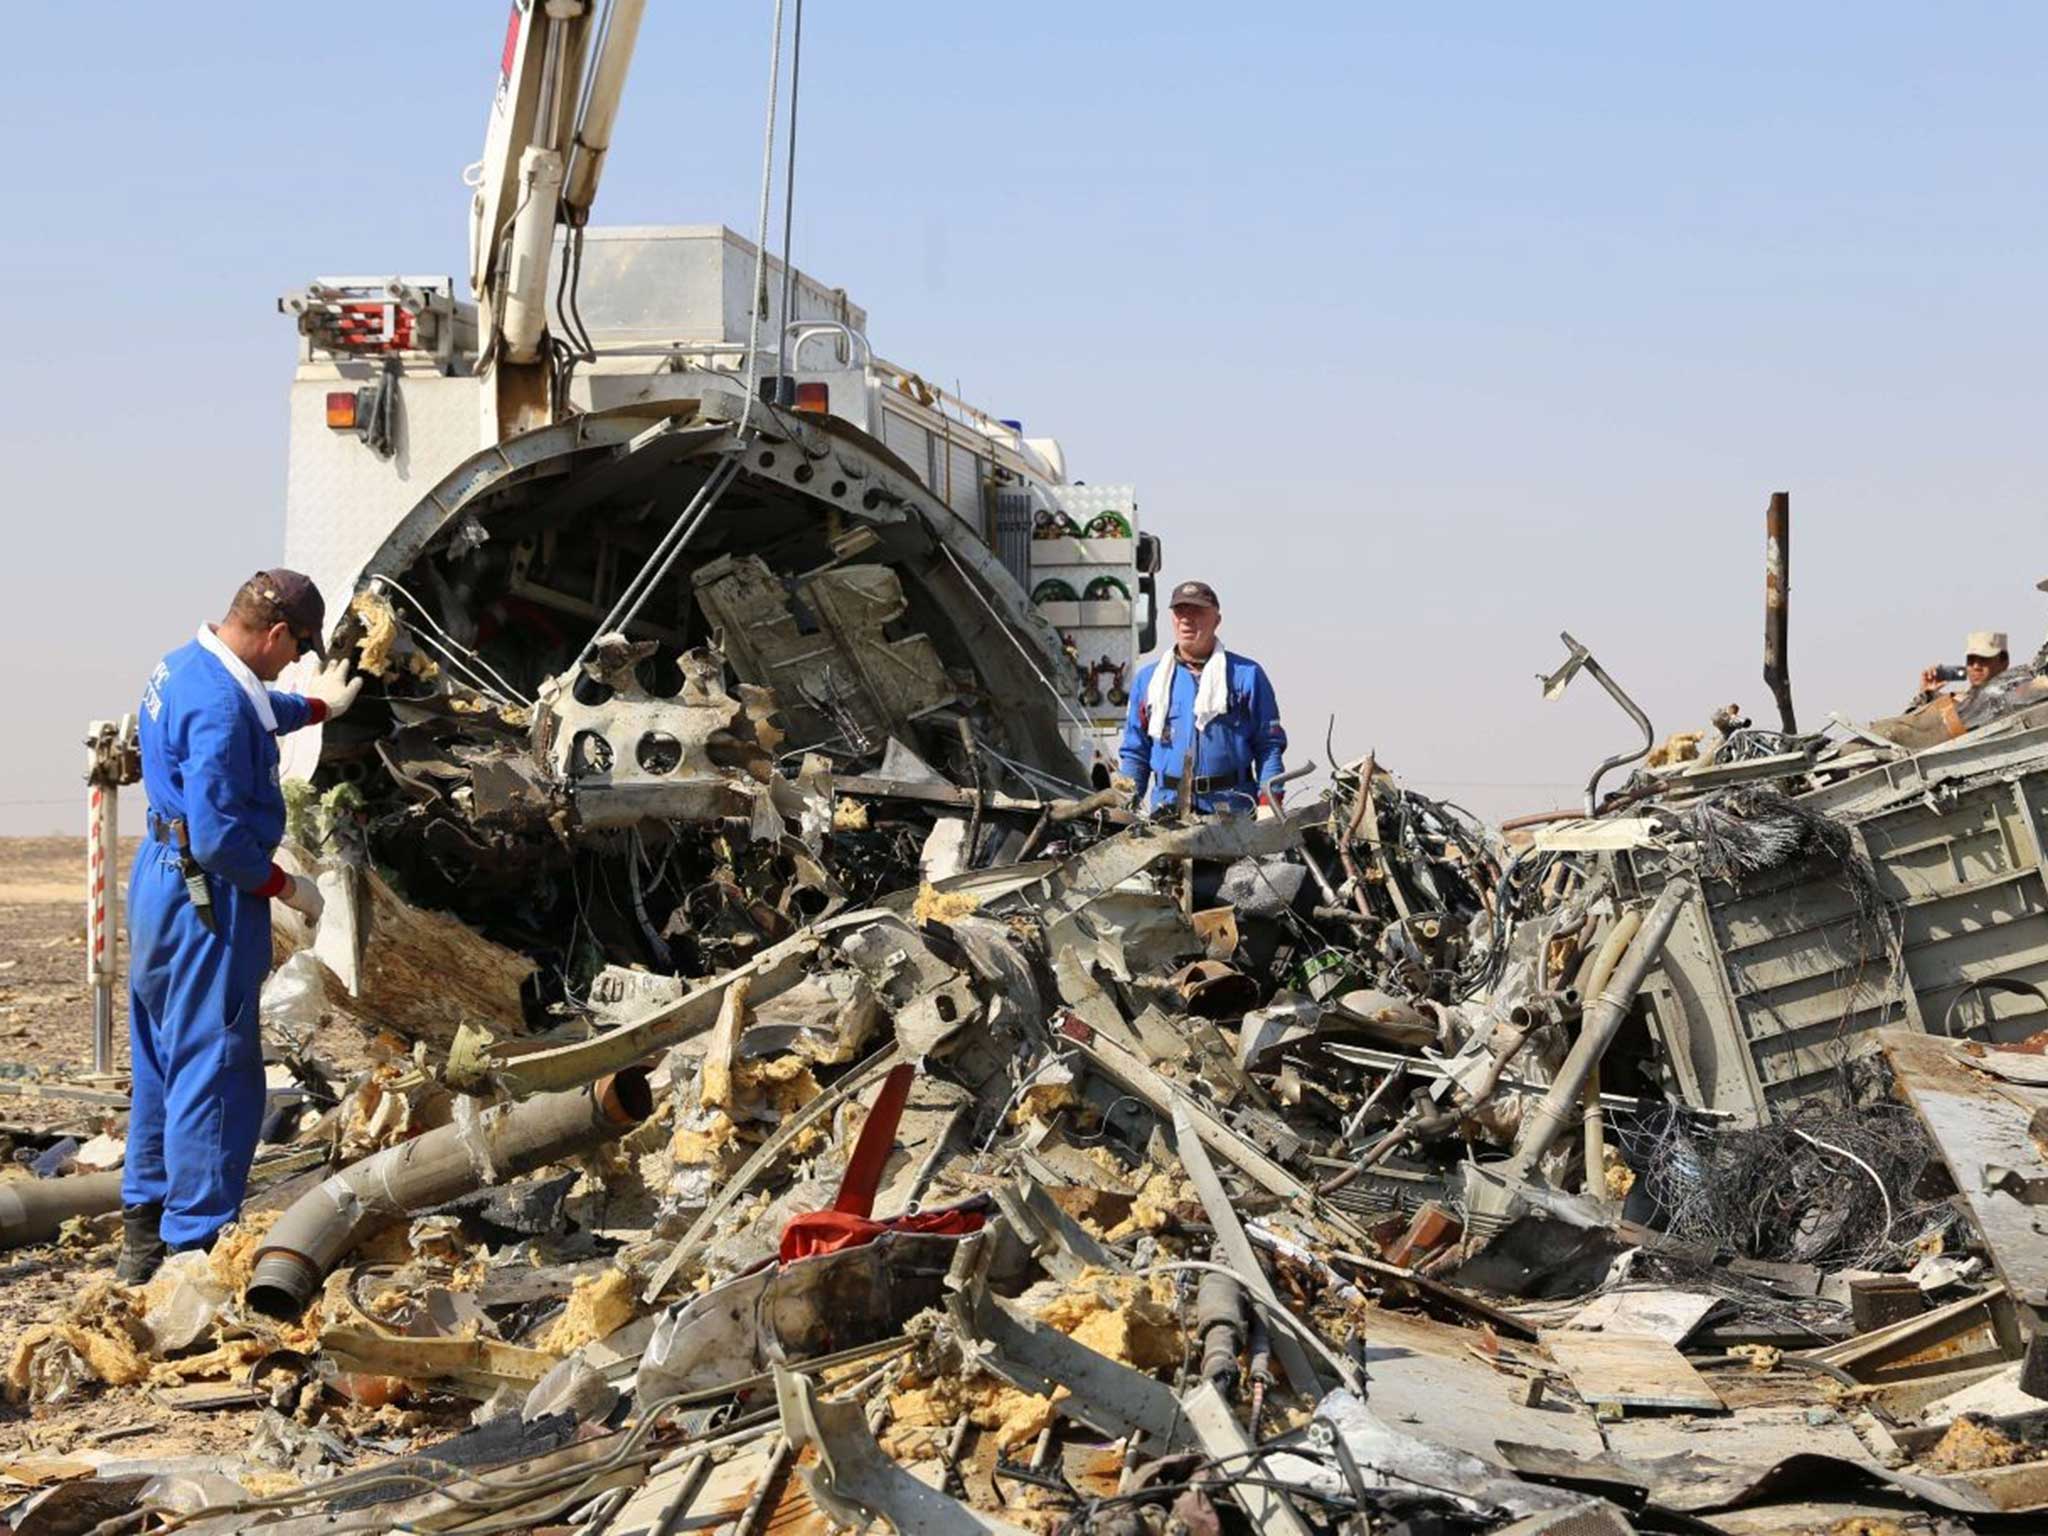 The plane's wreckage is examined by investigators